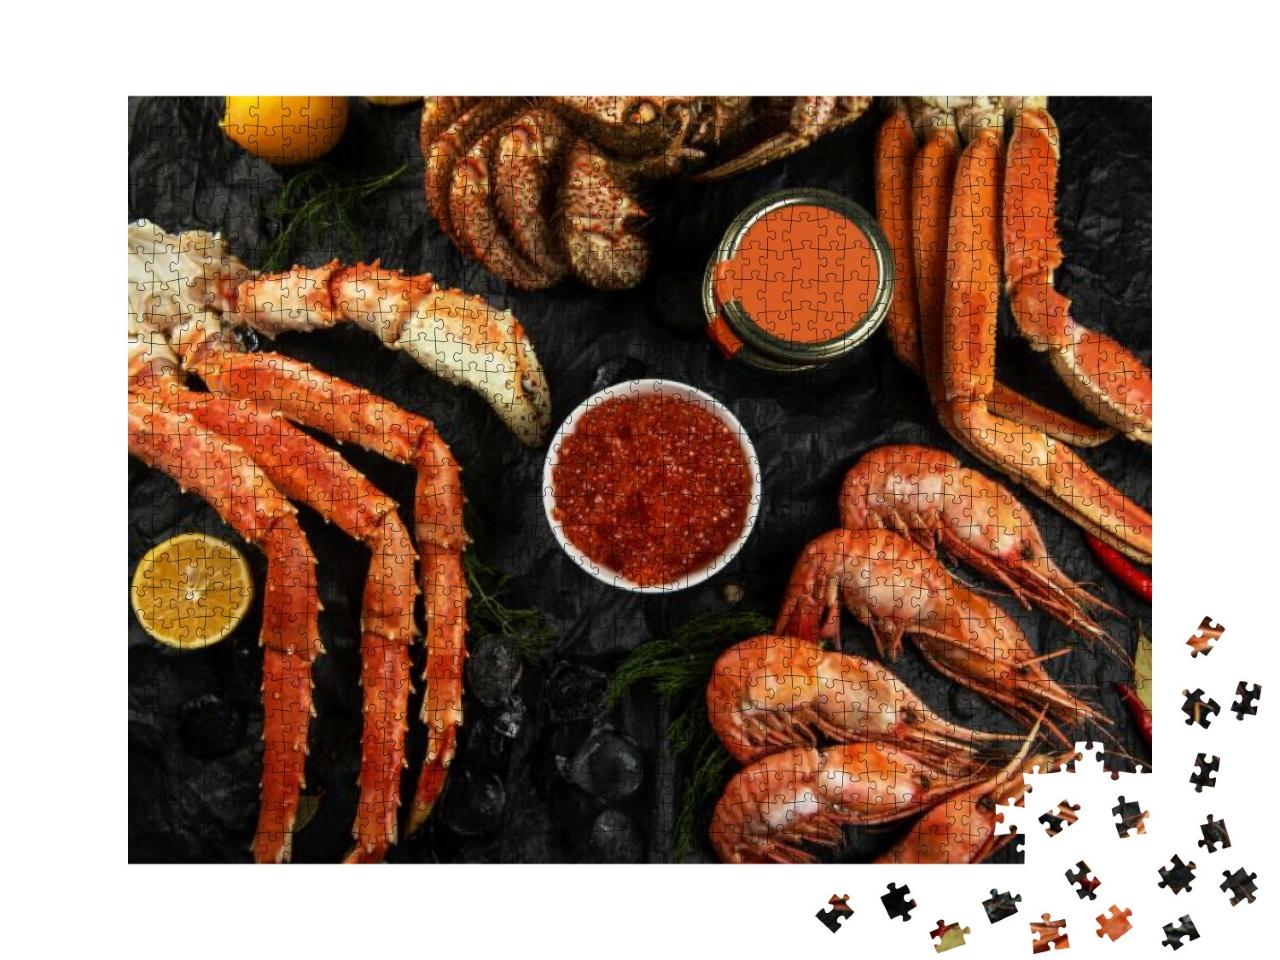 Set of Seafood Red & Black Caviar, Limb of Hair... Jigsaw Puzzle with 1000 pieces